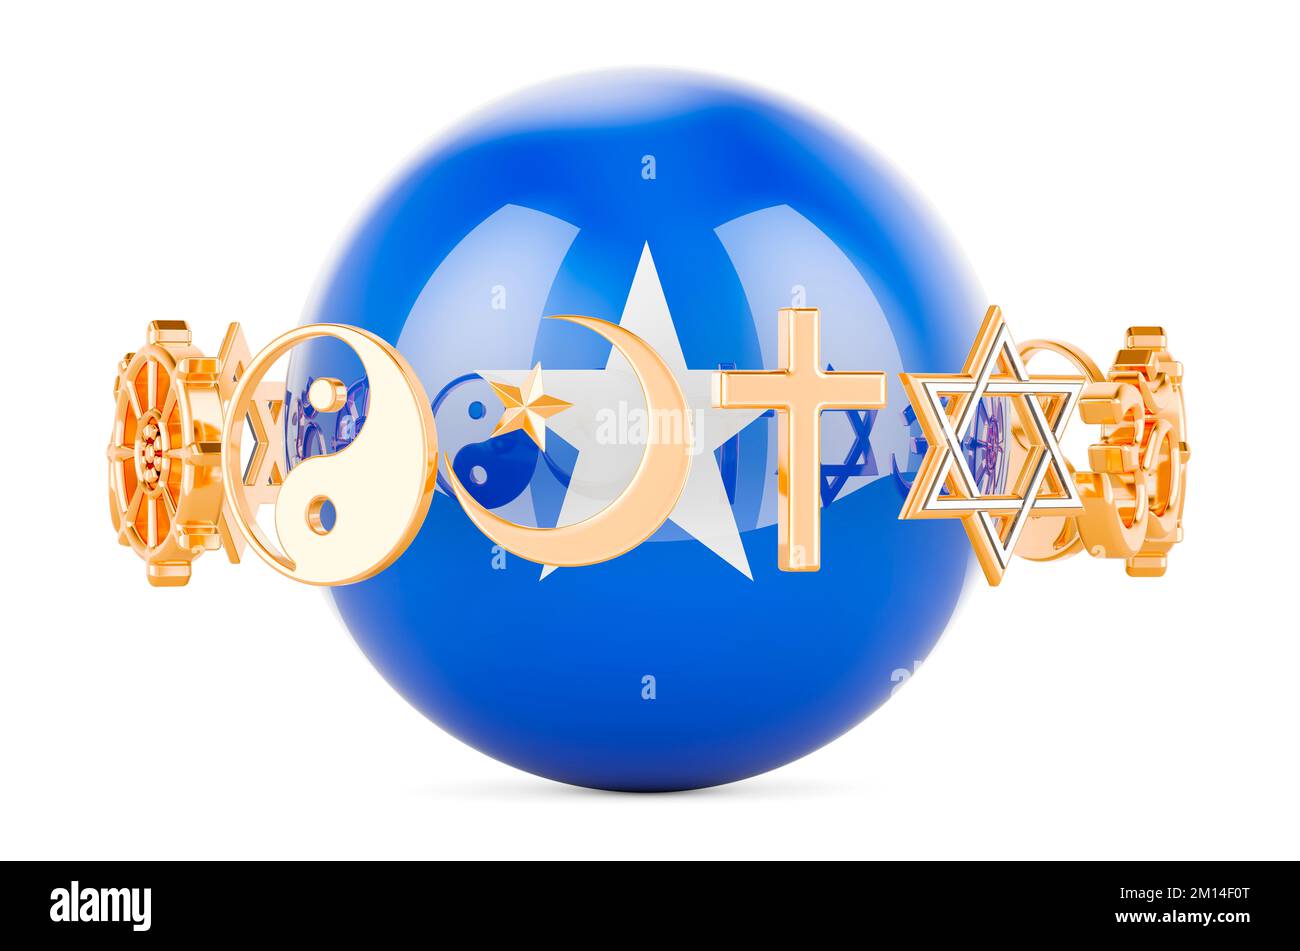 Somali flag painted on sphere with religions symbols around, 3D rendering isolated on white background Stock Photo